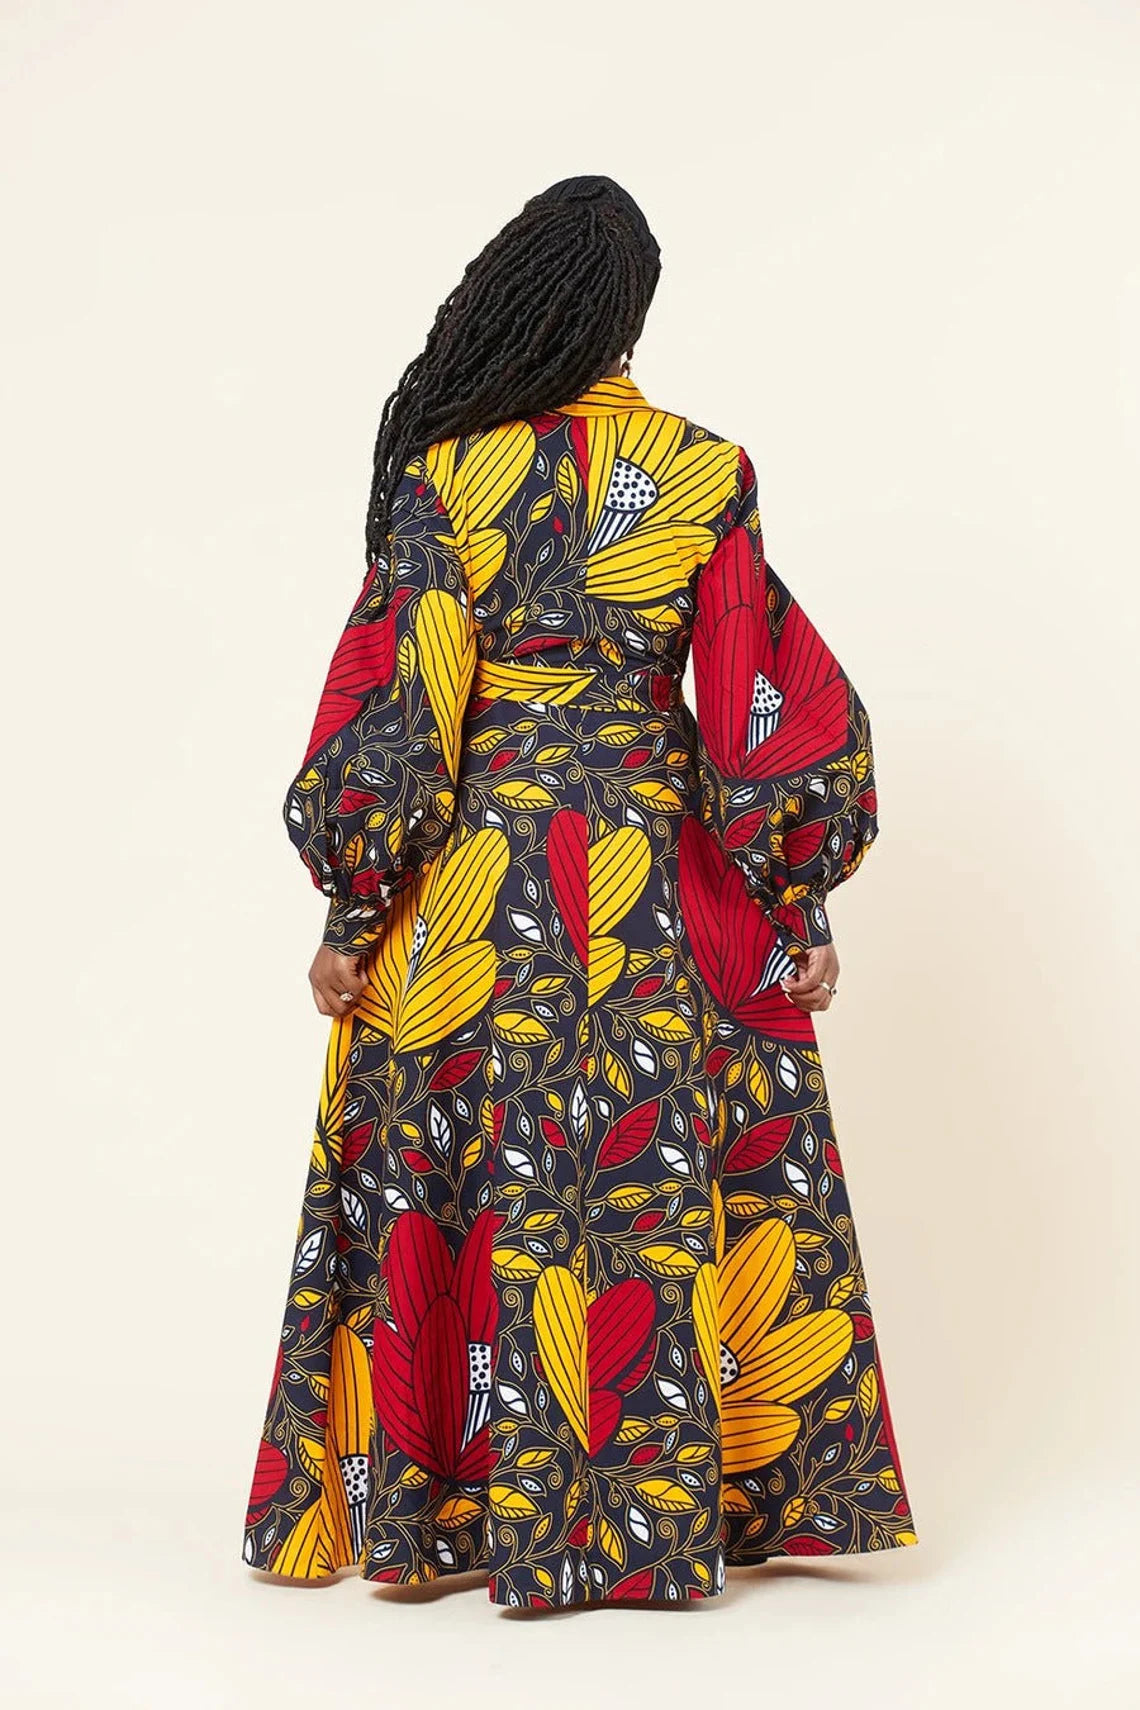 Red Yellow Plus Size African Ankara Print Long Shirt Dress with Free Headwrap and Nose Mask - Flexi Africa - Flexi Africa offers Free Delivery Worldwide - Vibrant African traditional clothing showcasing bold prints and intricate designs